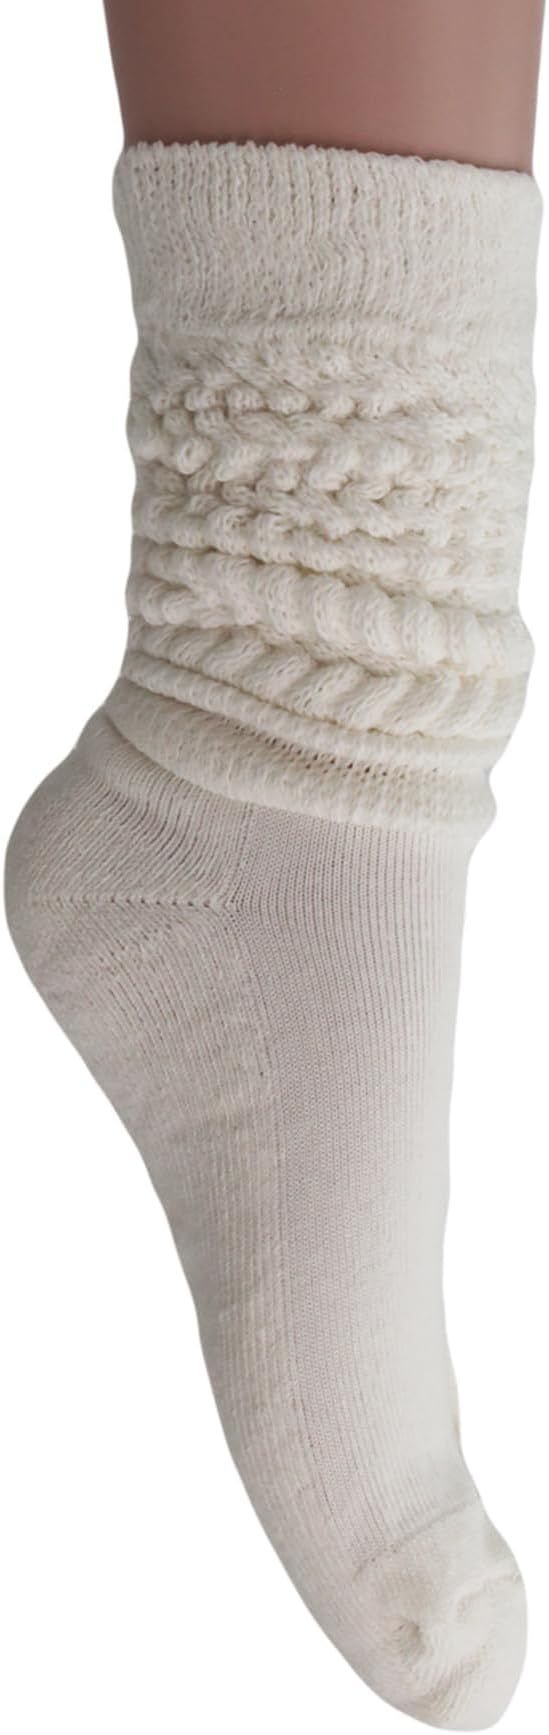 AWS/American Made Women's Extra Long Heavy Slouch Cotton Socks Size 9 to 11 | Amazon (US)